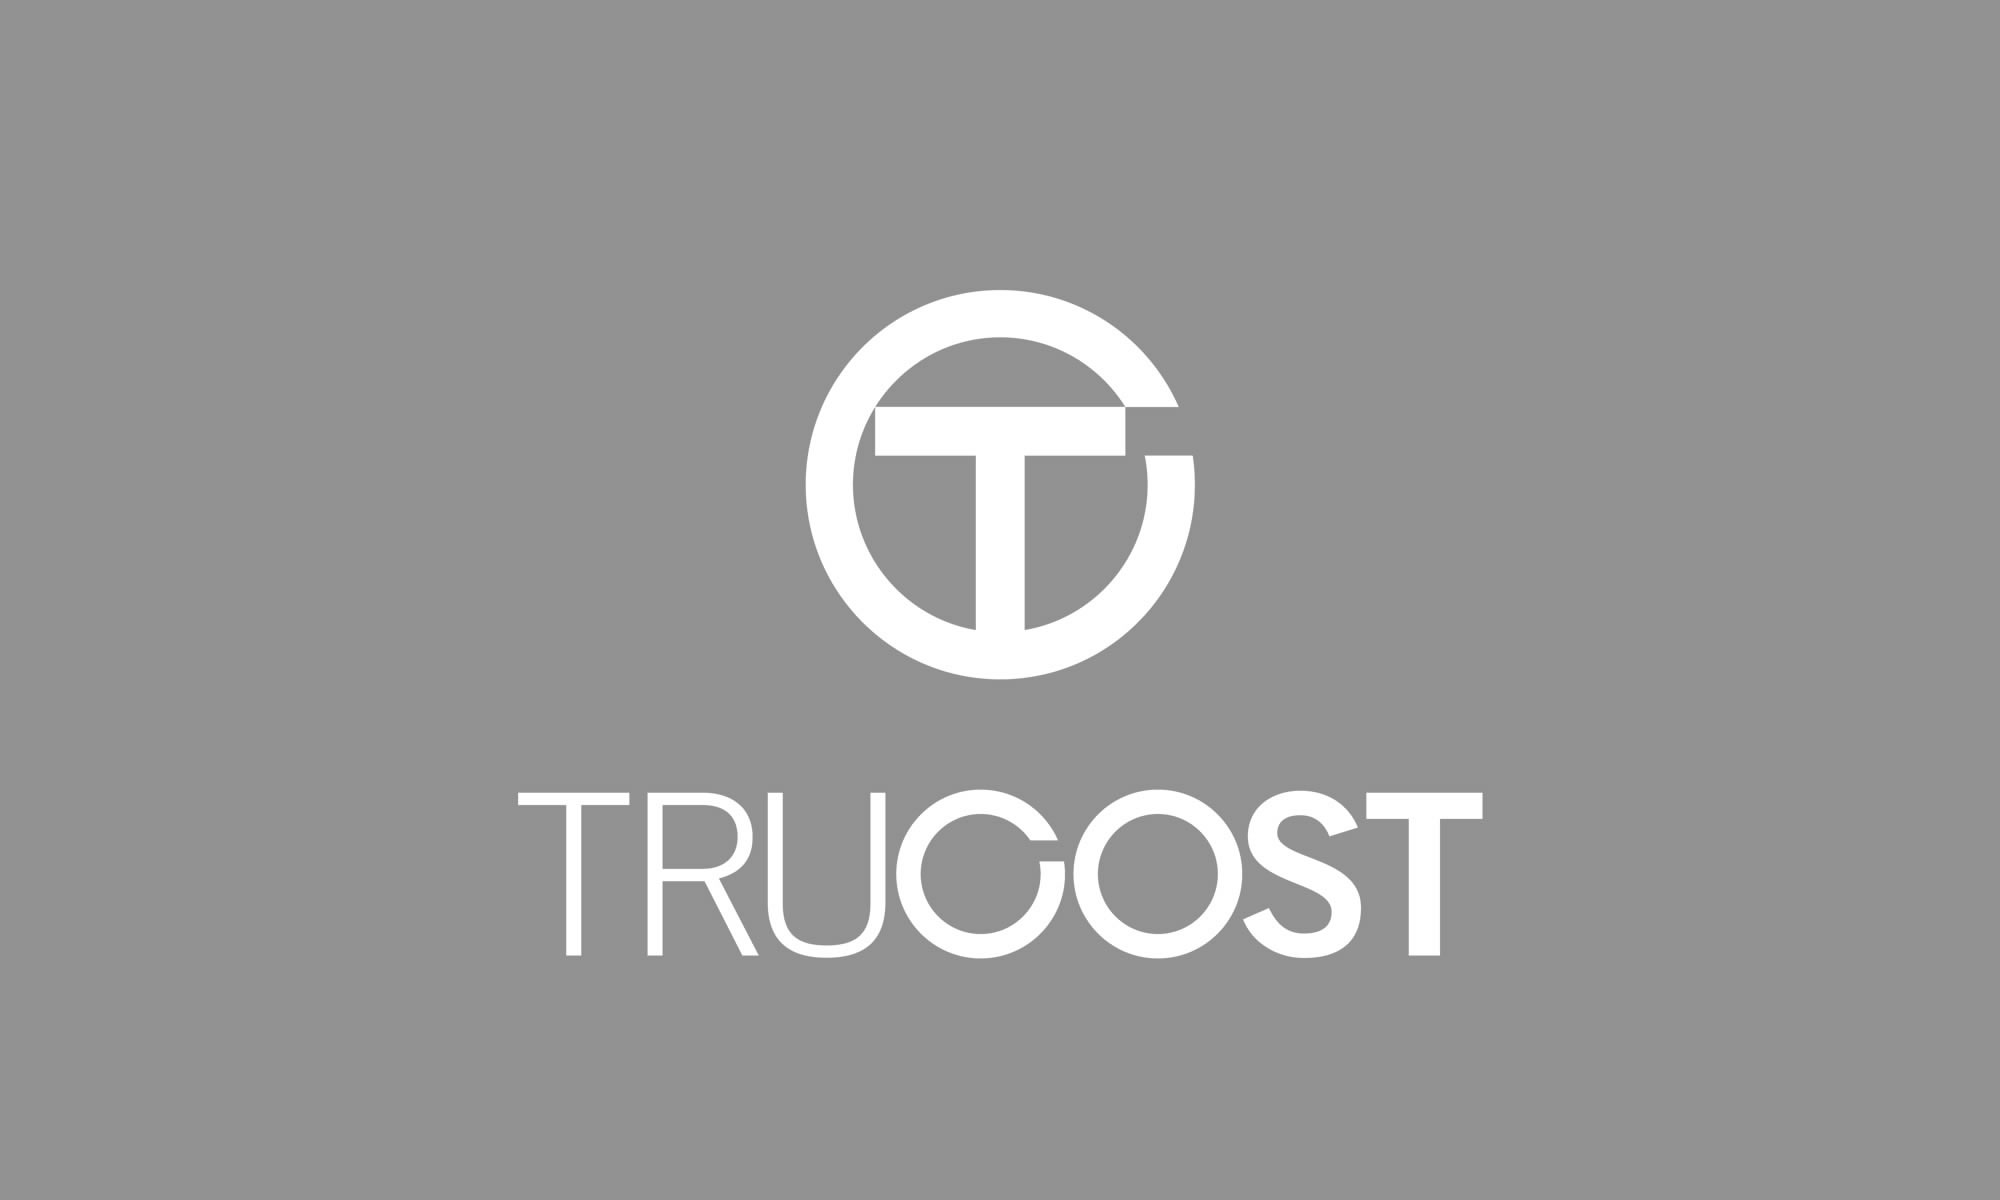 Trucost, part of S&P Global, assesses risks relating to climate change, natural resource constraints, and broader environmental, social, and governance factors.